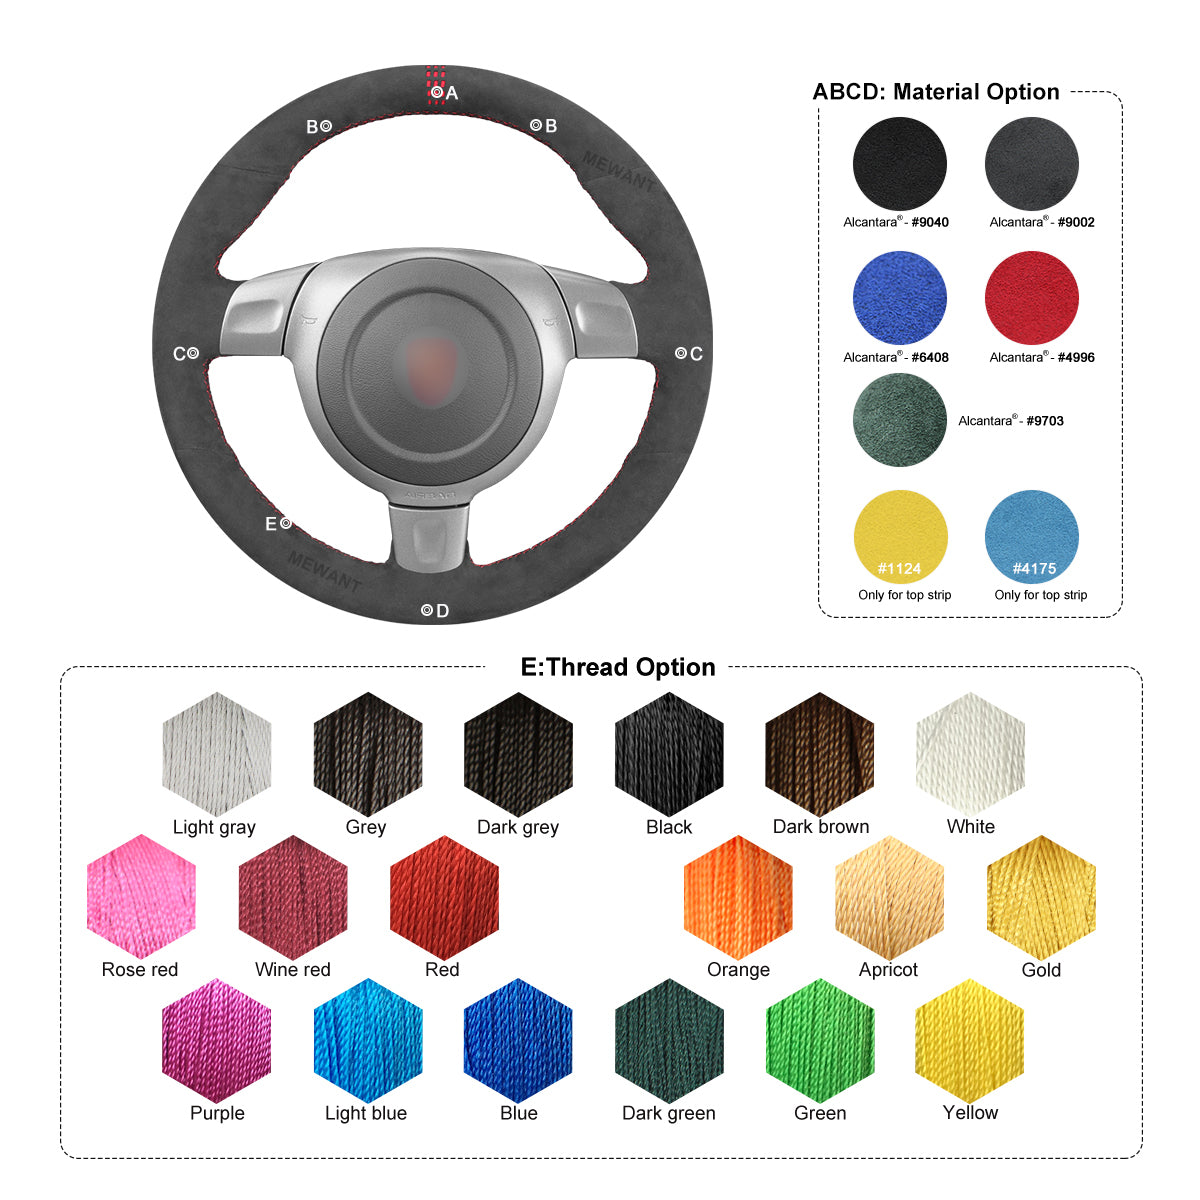 MEWANT Car Steering Wheel Cover Wrap for Porsche 911 (997) 2005-2009 / Boxster (987) 2005-2009 / Cayman (987) 2006-2009